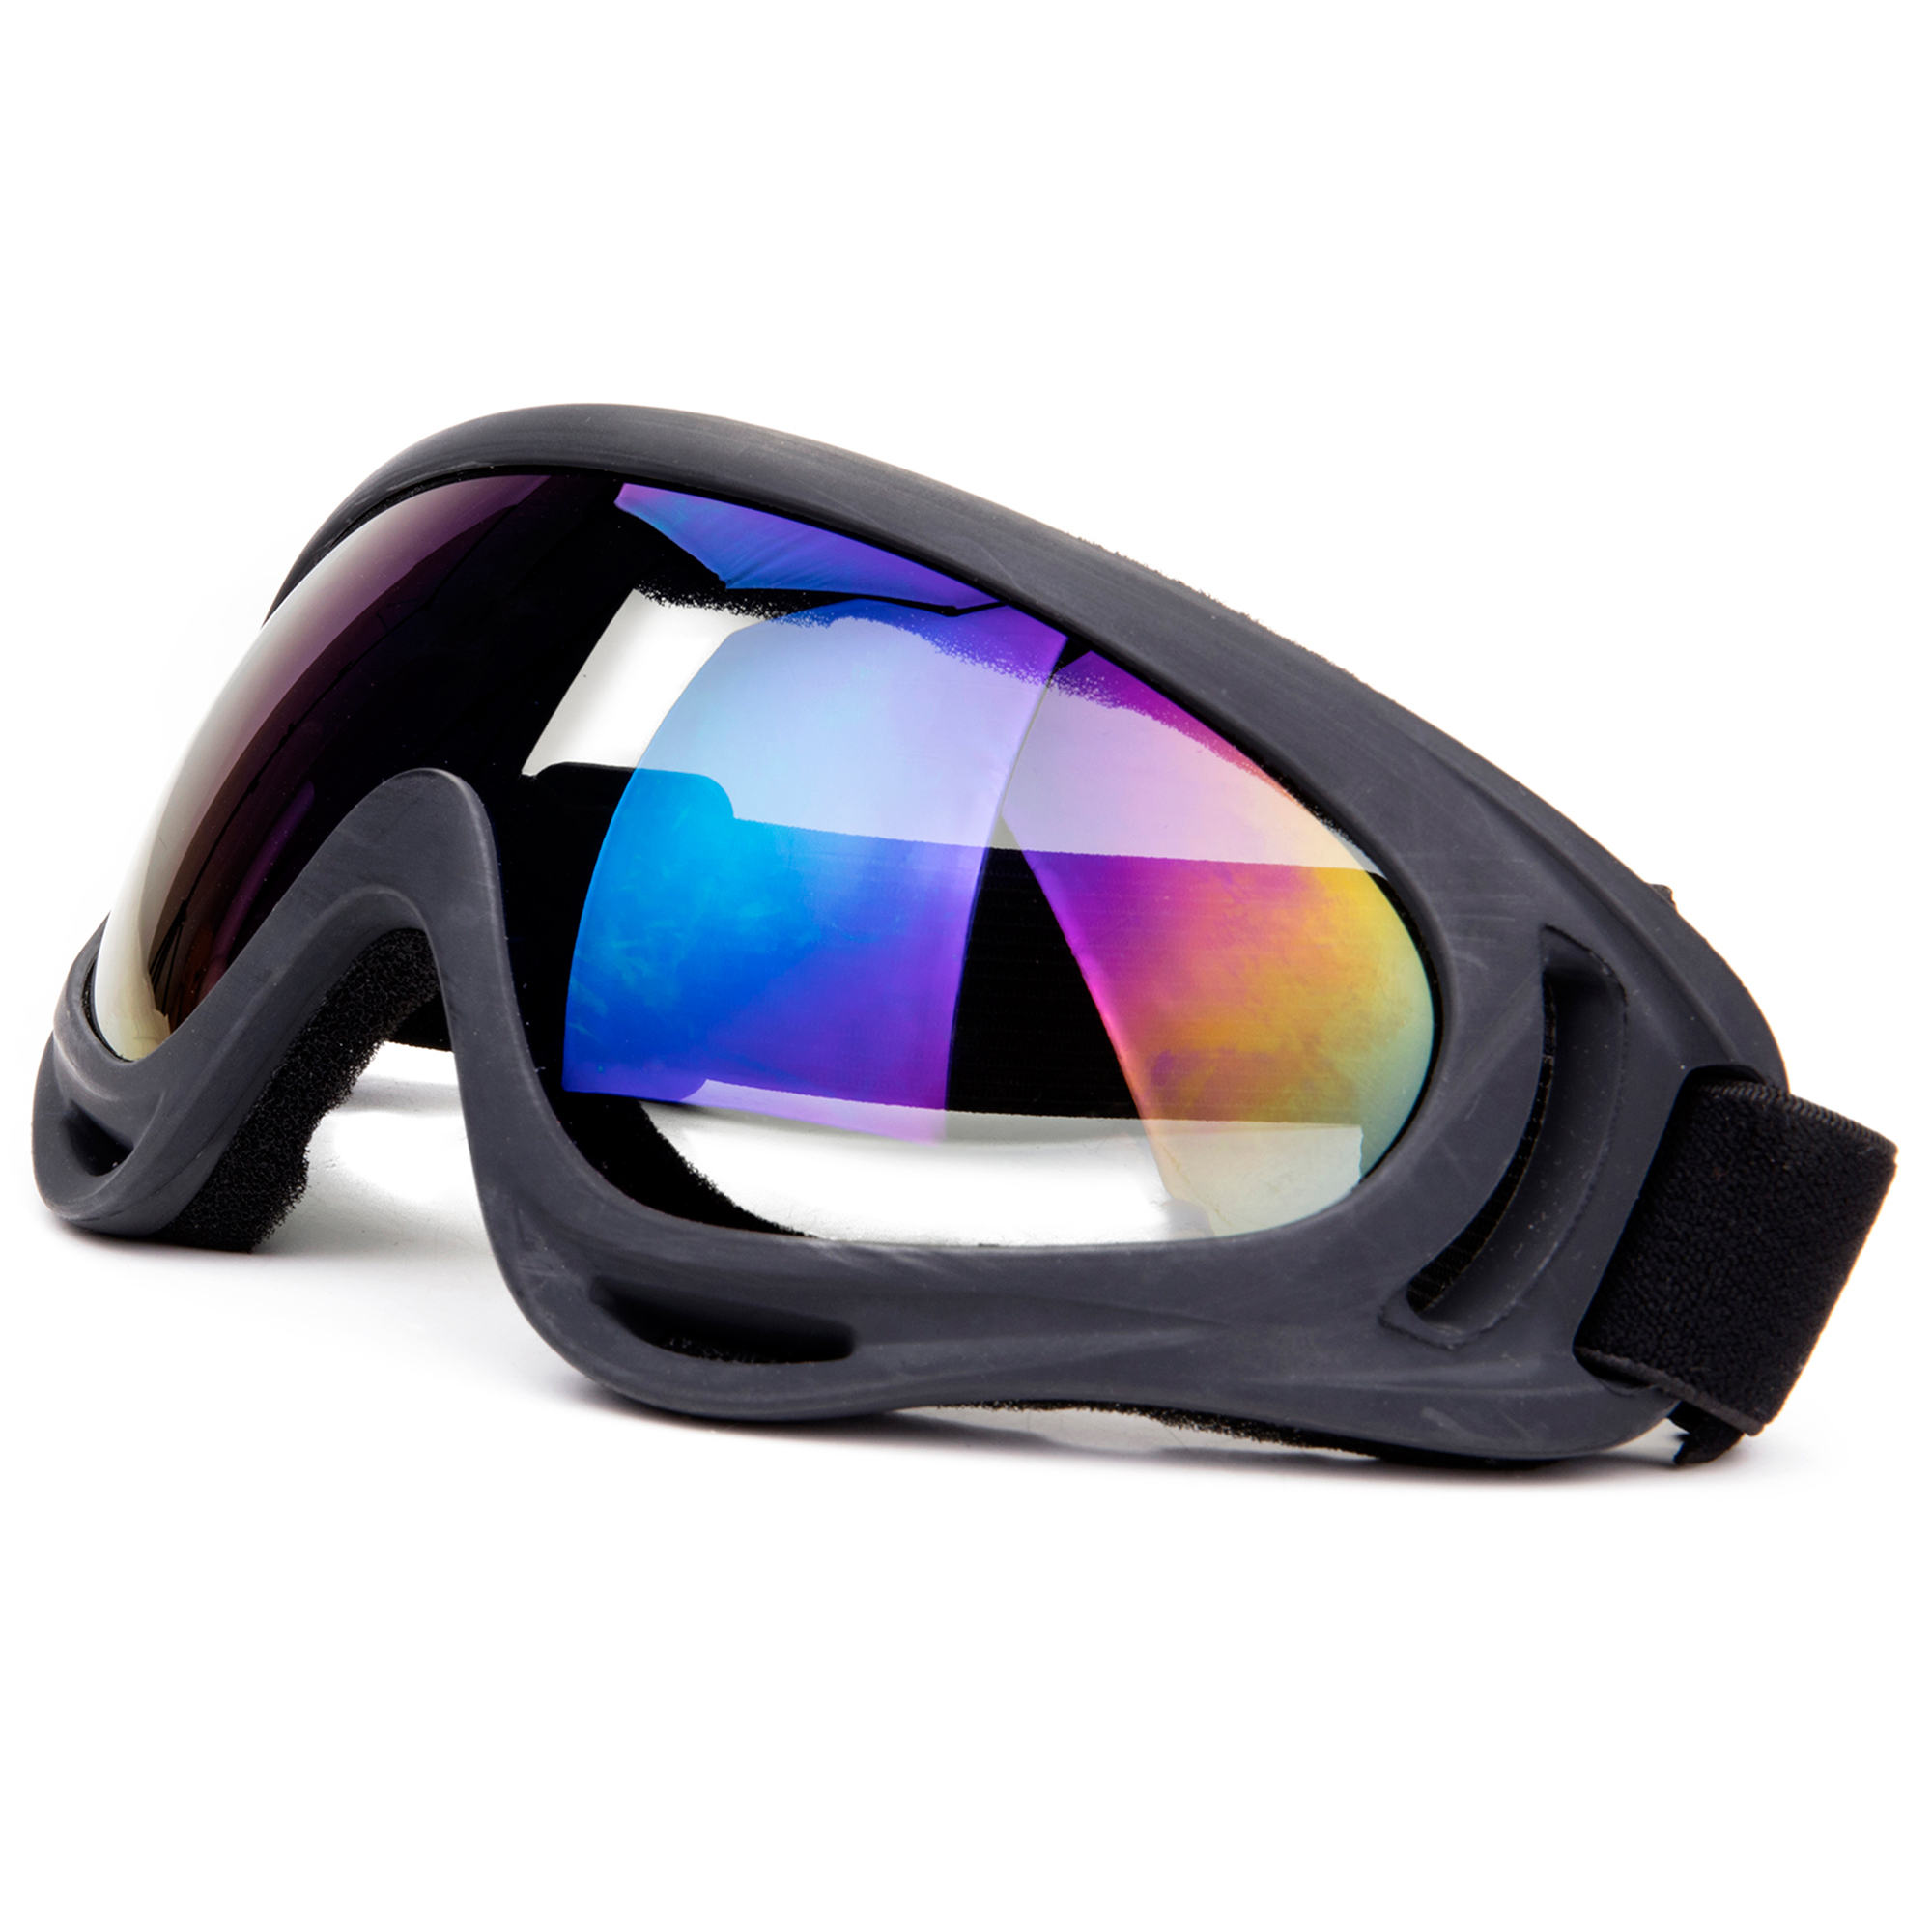 FOCUSSEXY Black and Multi-Color Snowboarding and Skiing Sport Goggles - image 1 of 8